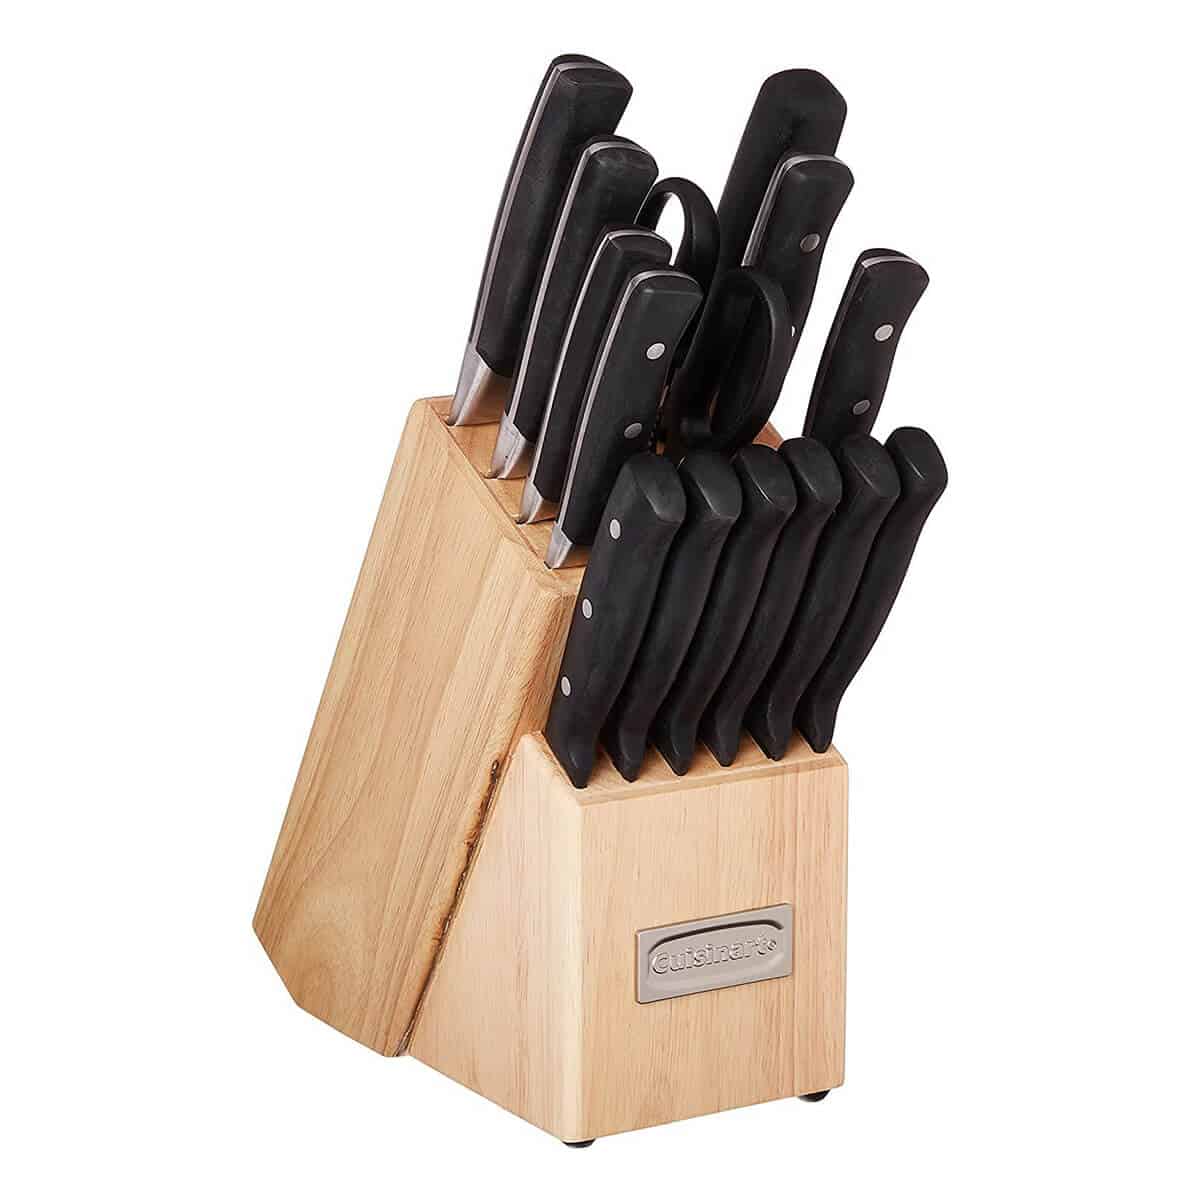 15 Piece Kitchen Knife Set with Block by Cuisinart, Cutlery Set, Triple Rivet Collection.